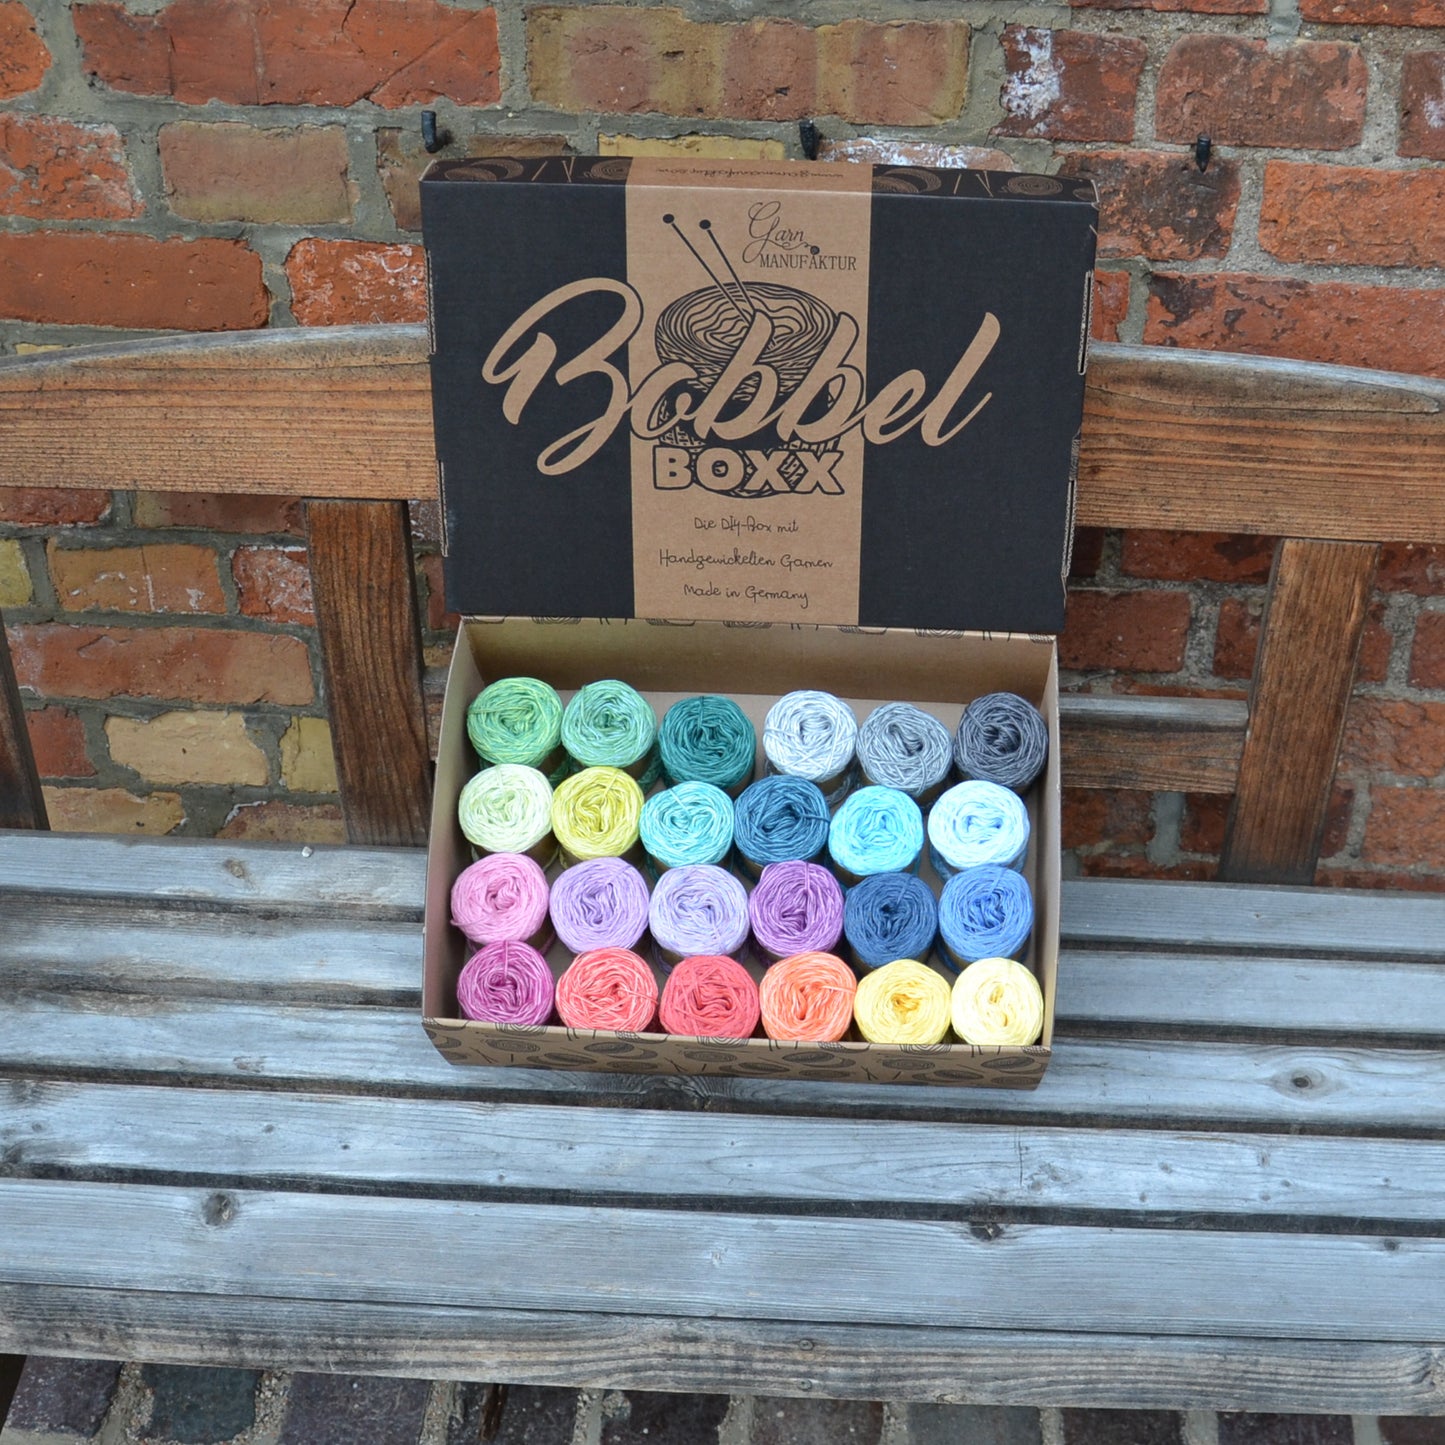 Lola Paint Boxx Special Orders